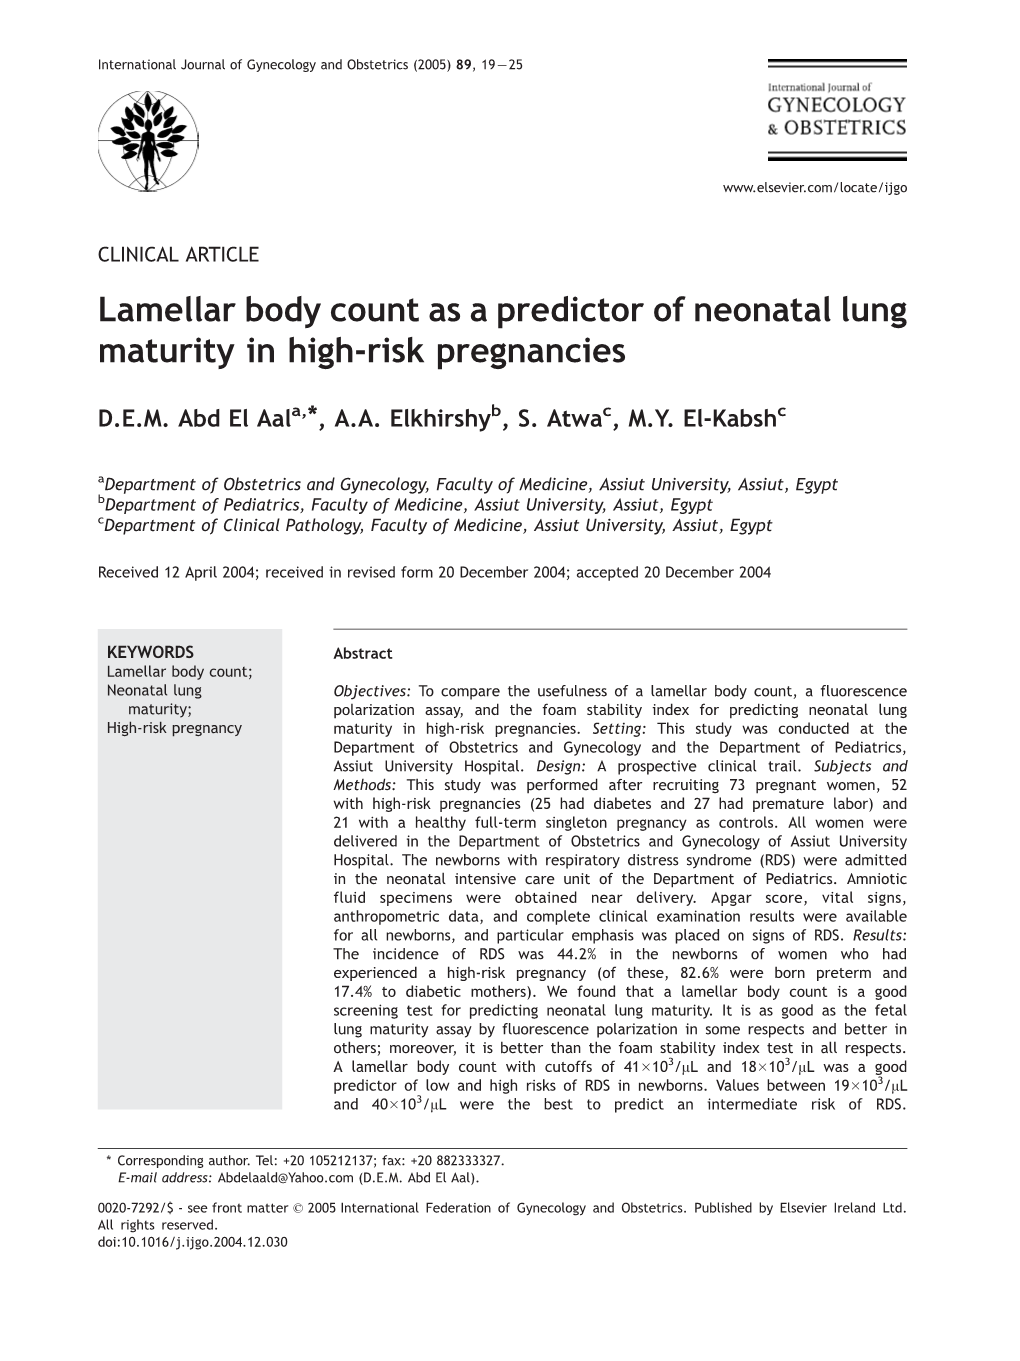 Lamellar Body Count As a Predictor of Neonatal Lung Maturity in High‐Risk